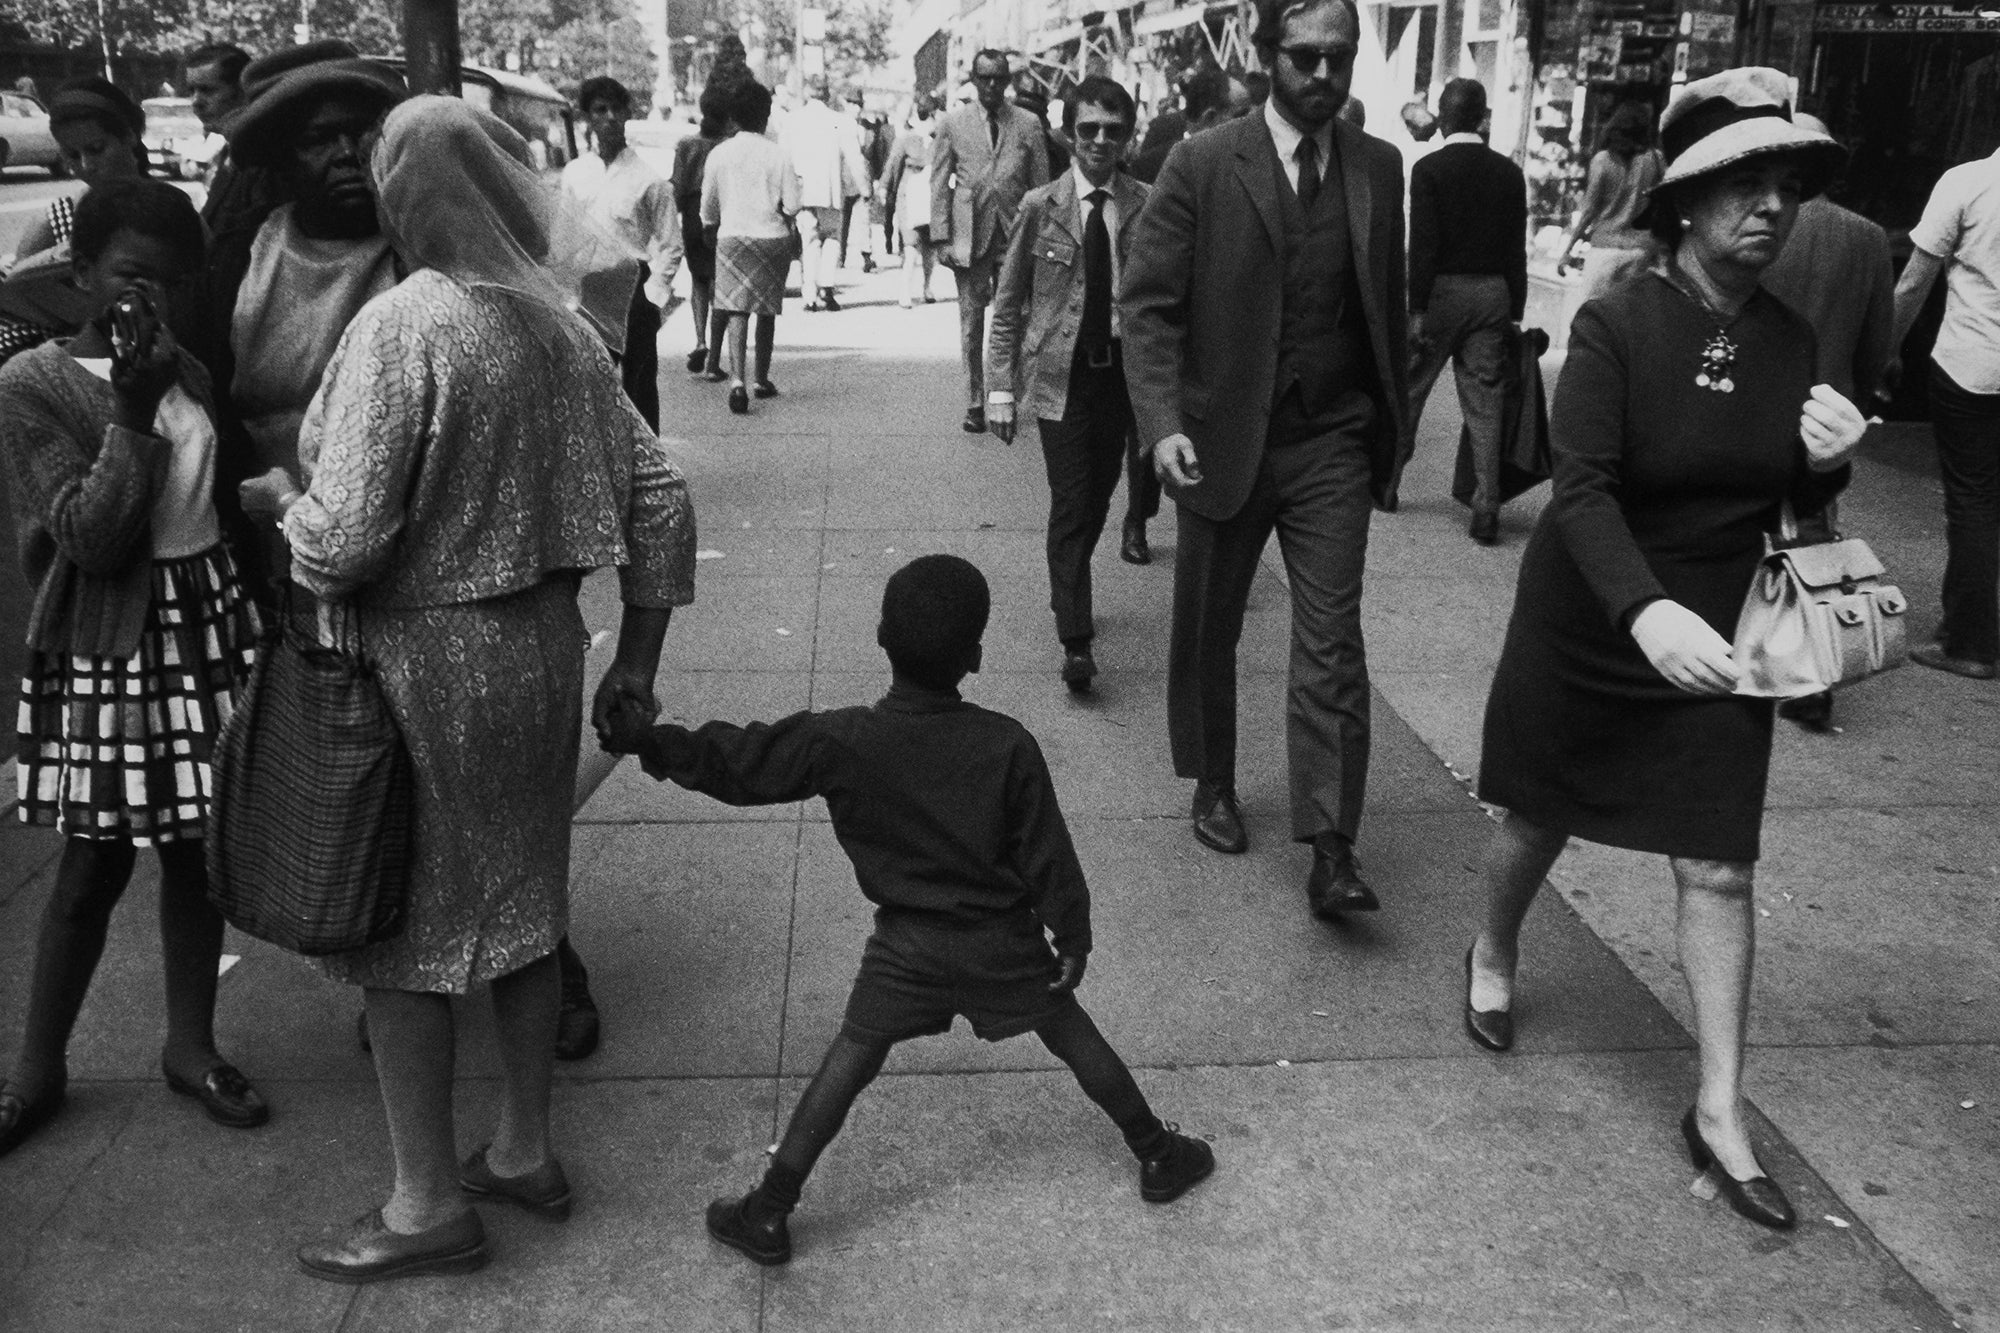 Garry Winogrand — The Man in the Crowd